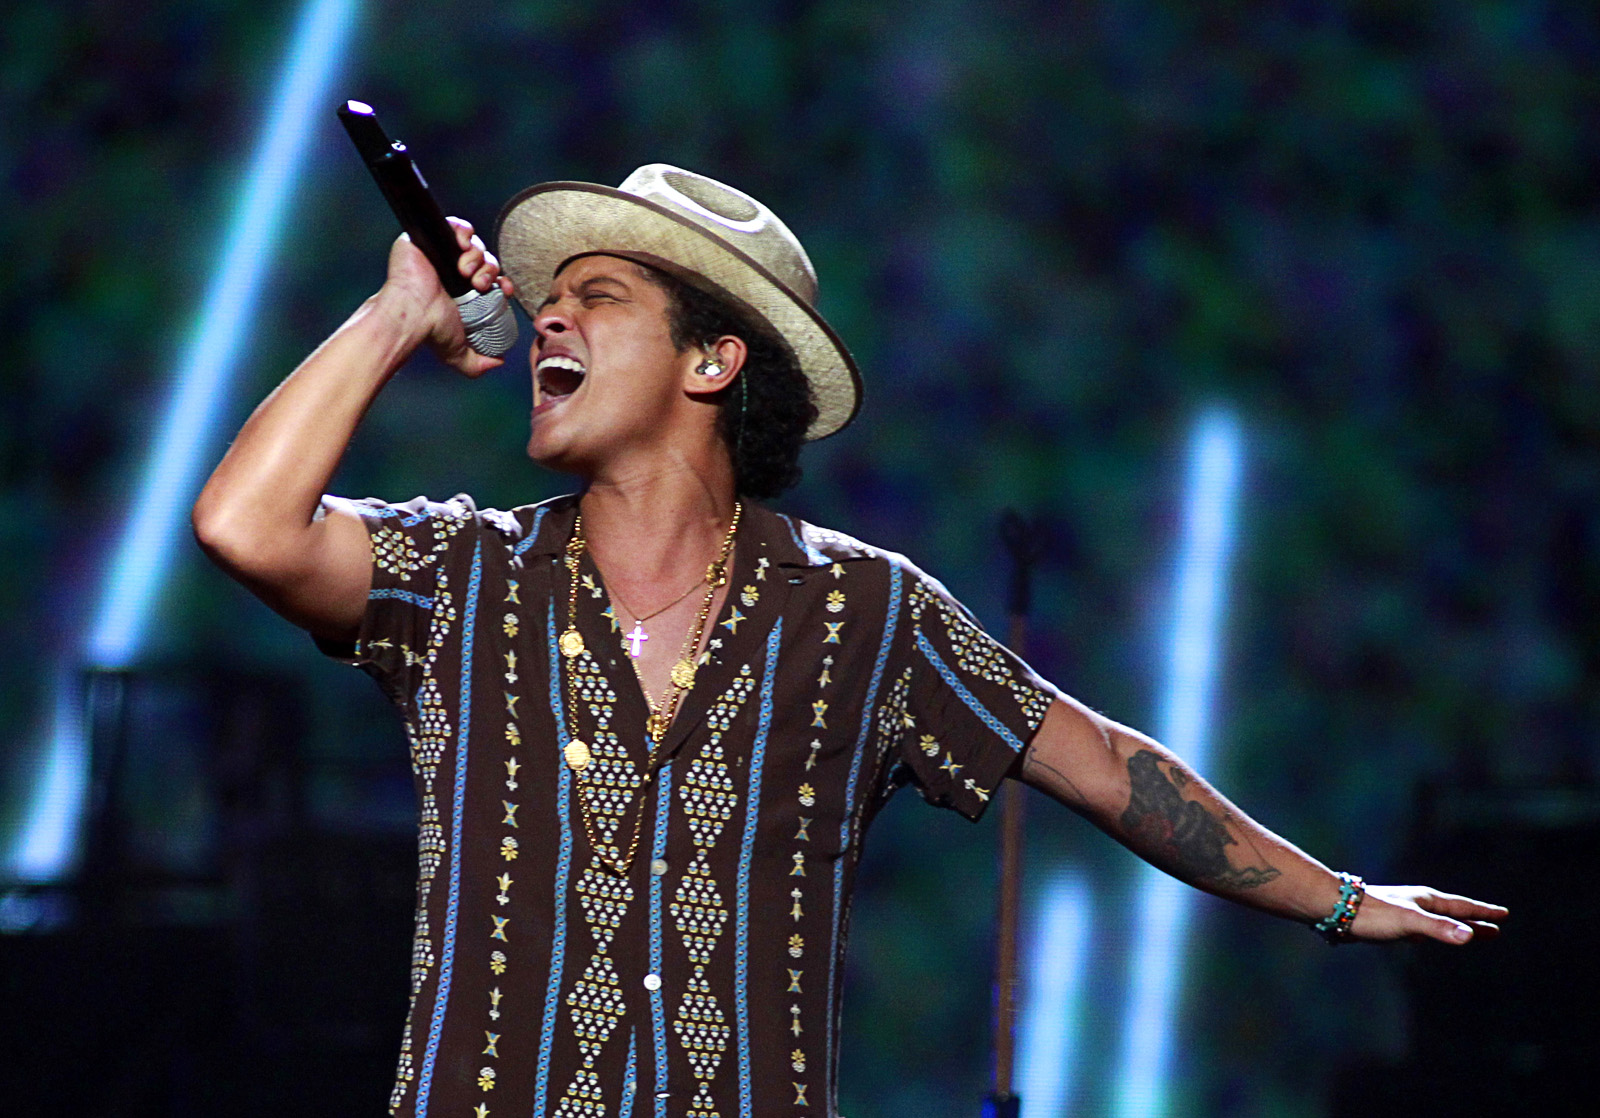 Bruno Mars Bruno Mars Photo 21822411 Fanpop Pictures to pin on 